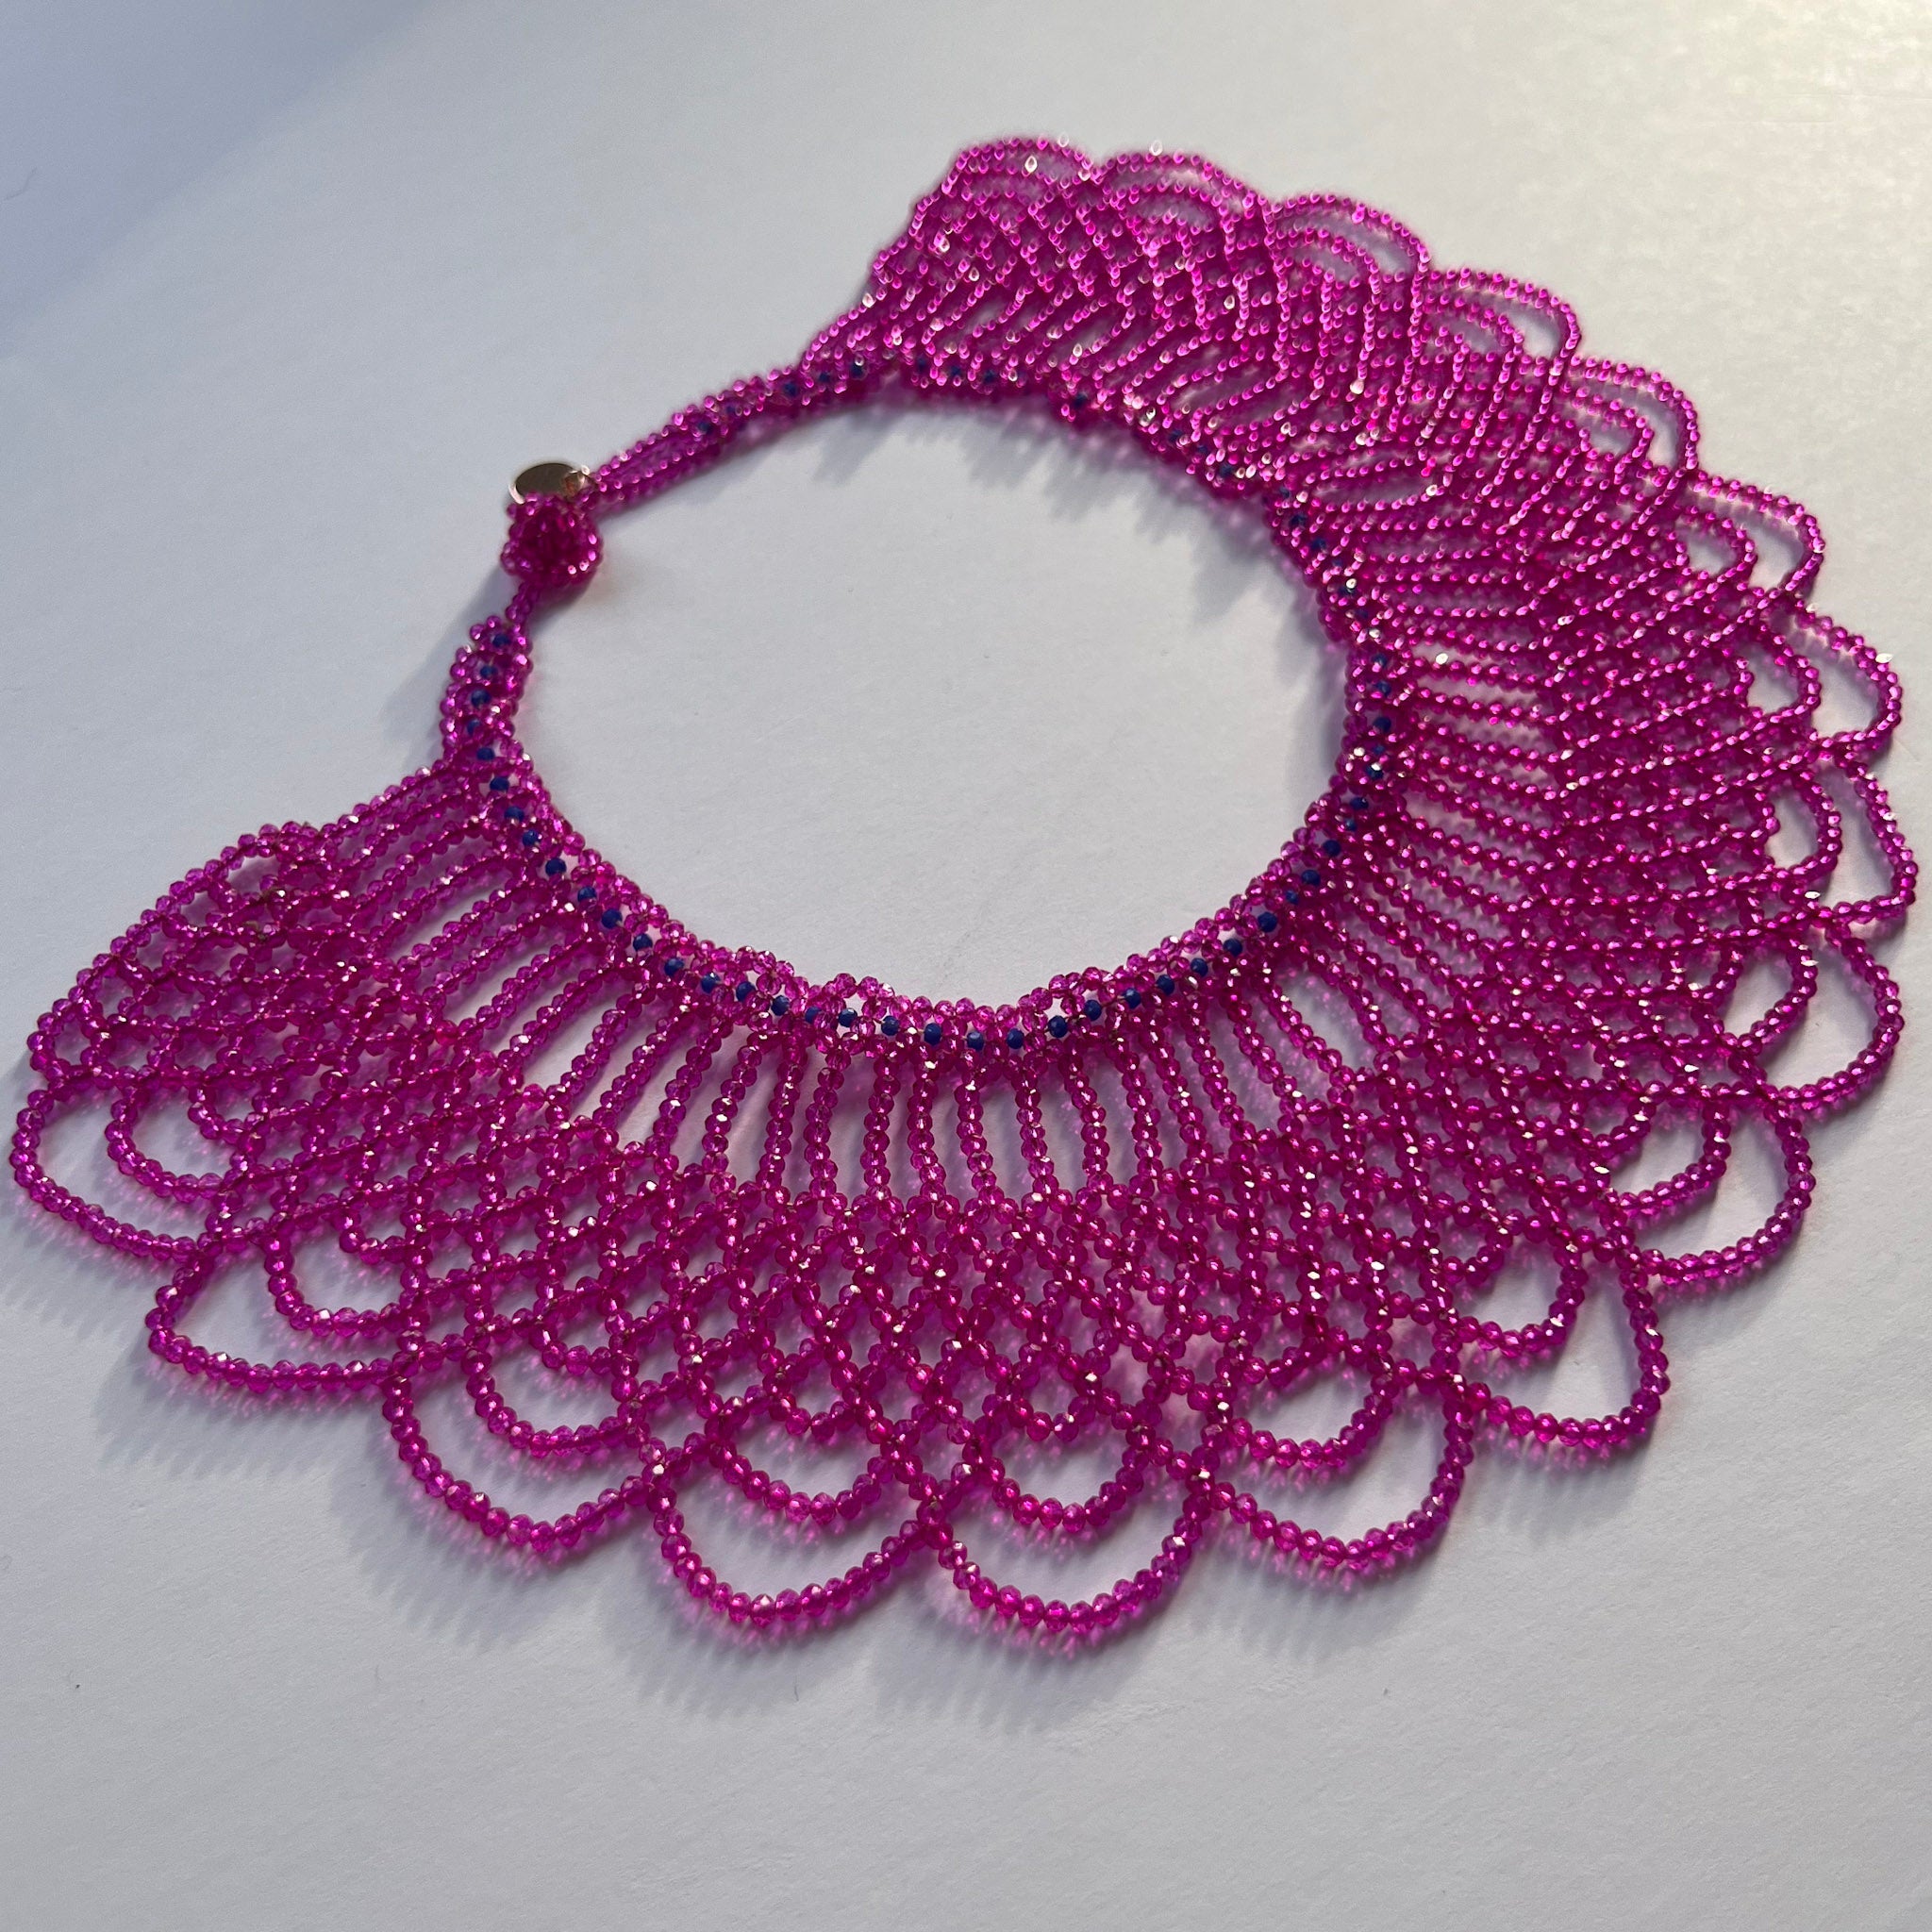 Beaded Collar Necklace - Pink